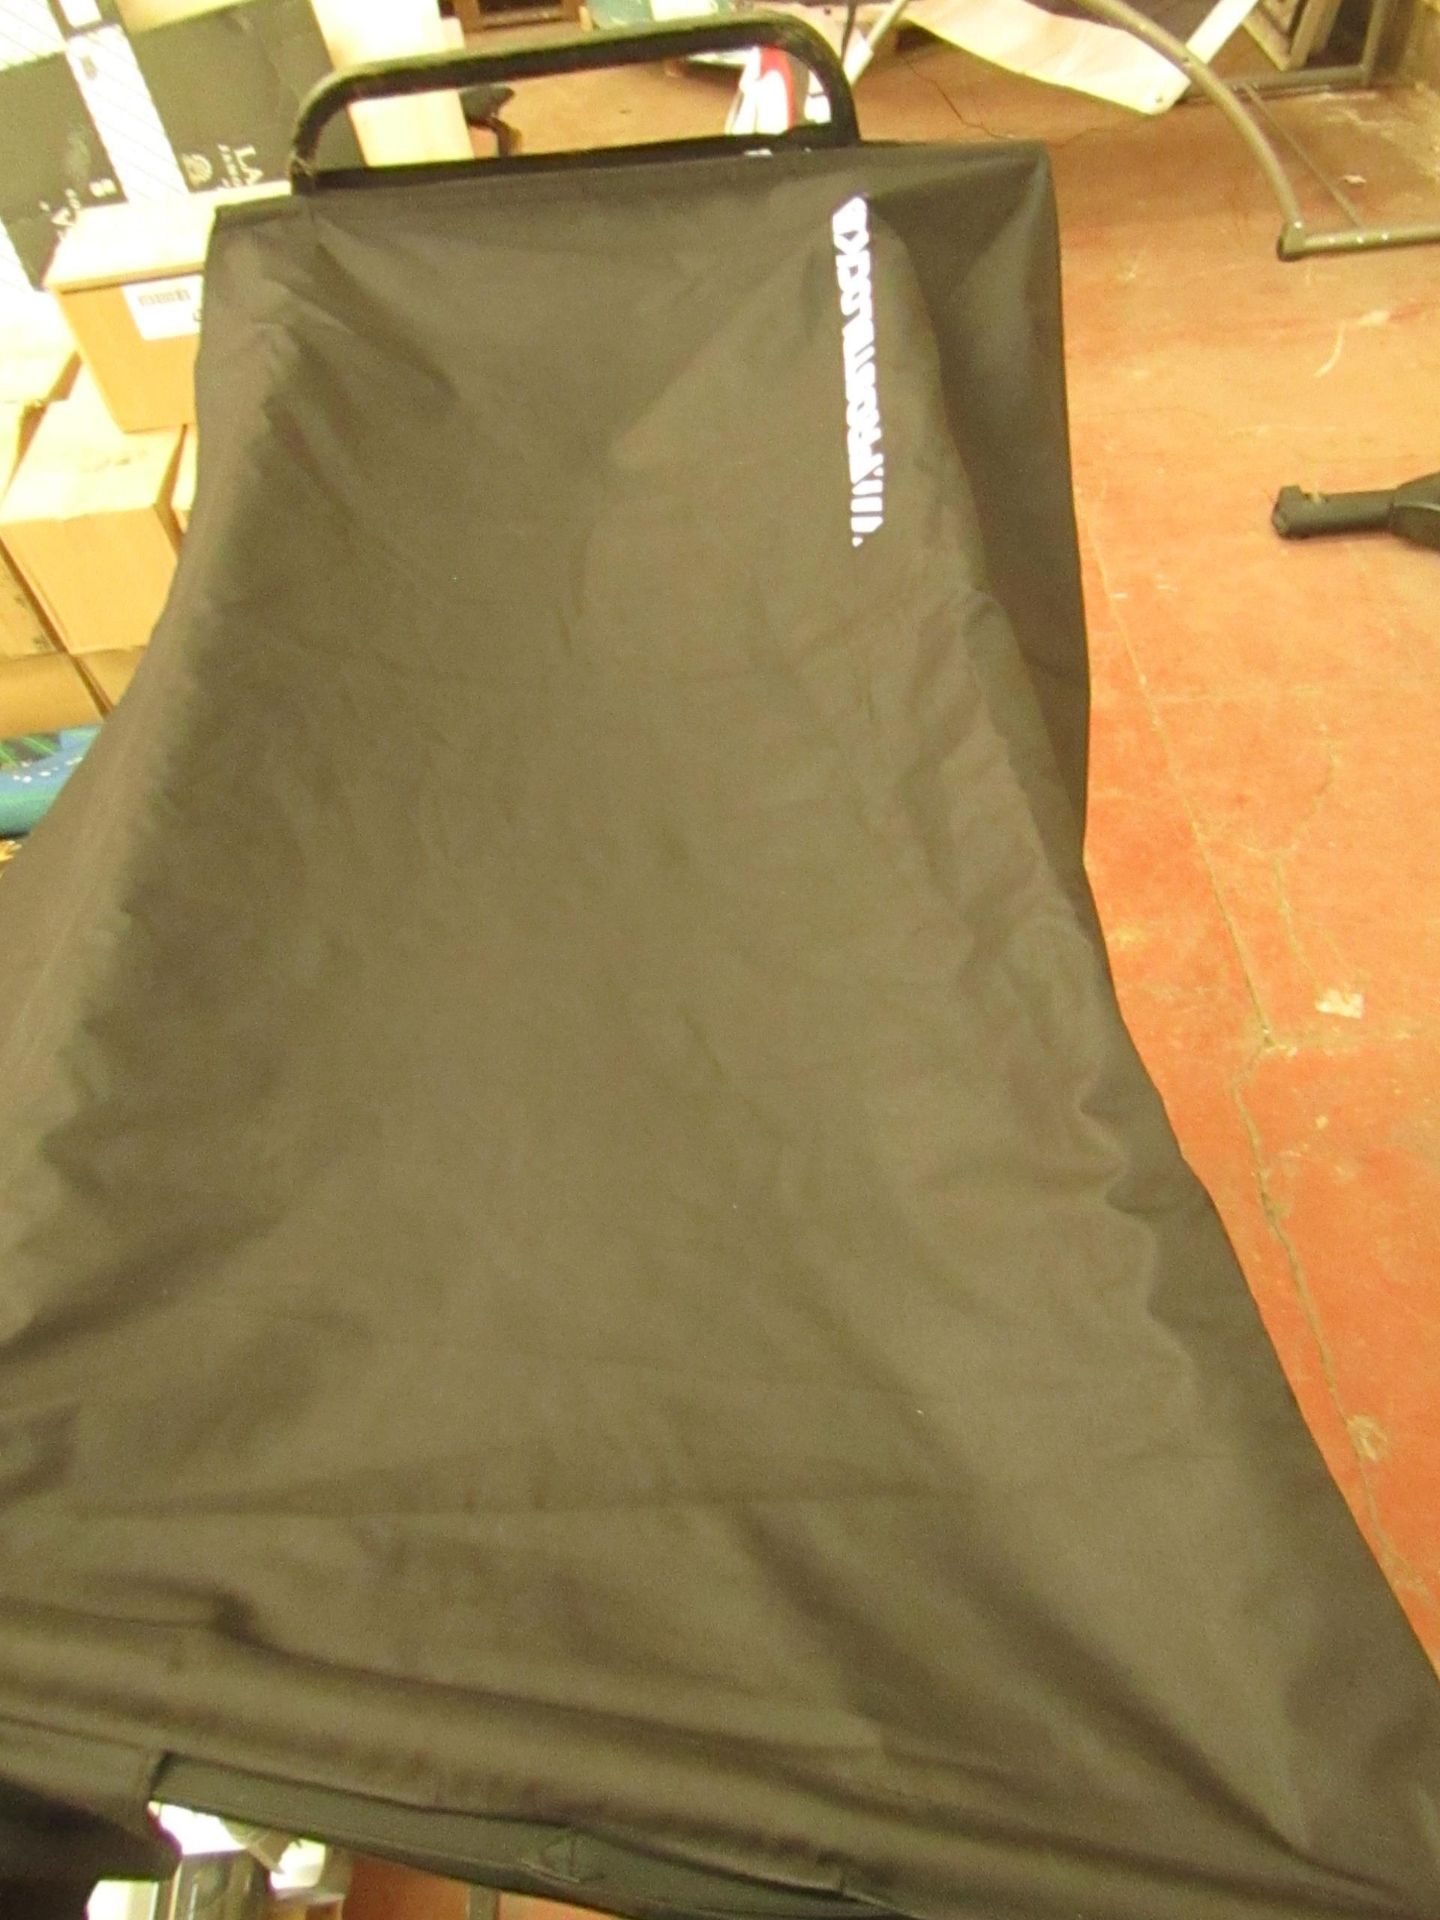 Frostblocker - Wind-Screen Ice/Snow Protector ( 150x104cm ) - All Good Condition.